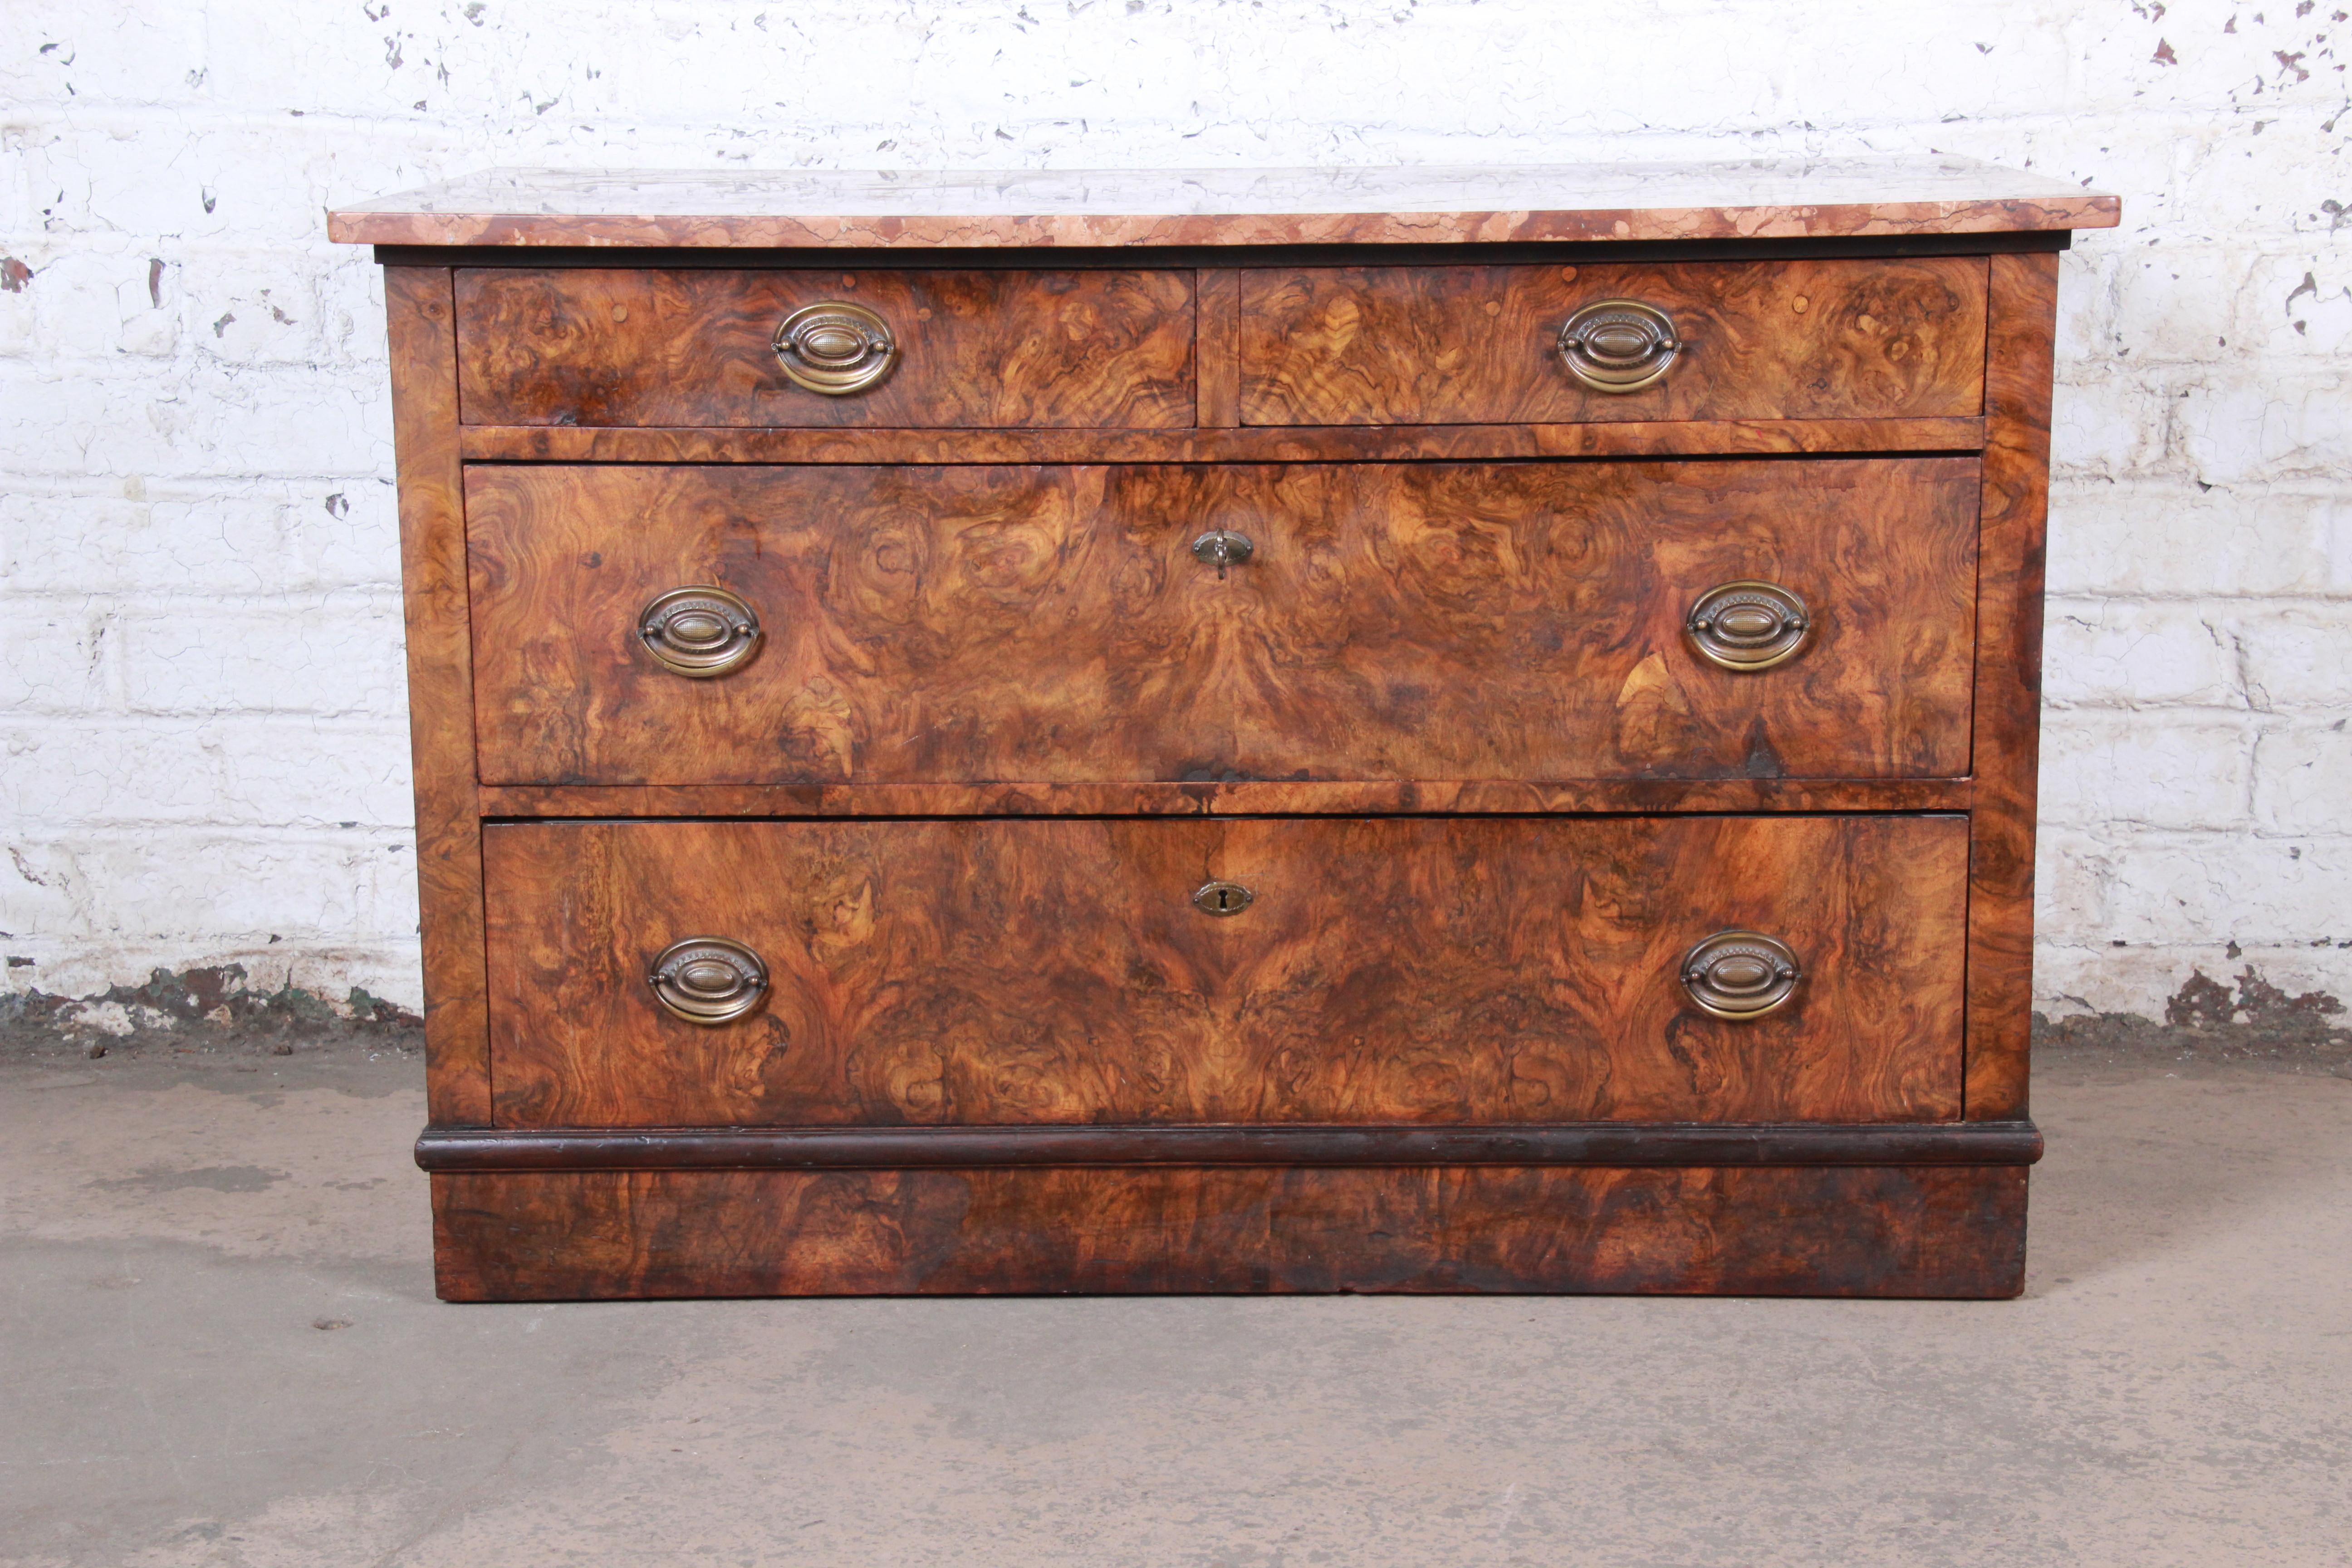 A gorgeous antique burled walnut marble top commode or dresser chest

USA, circa 1880s

Burled walnut, marble and brass

Measures: 45.38